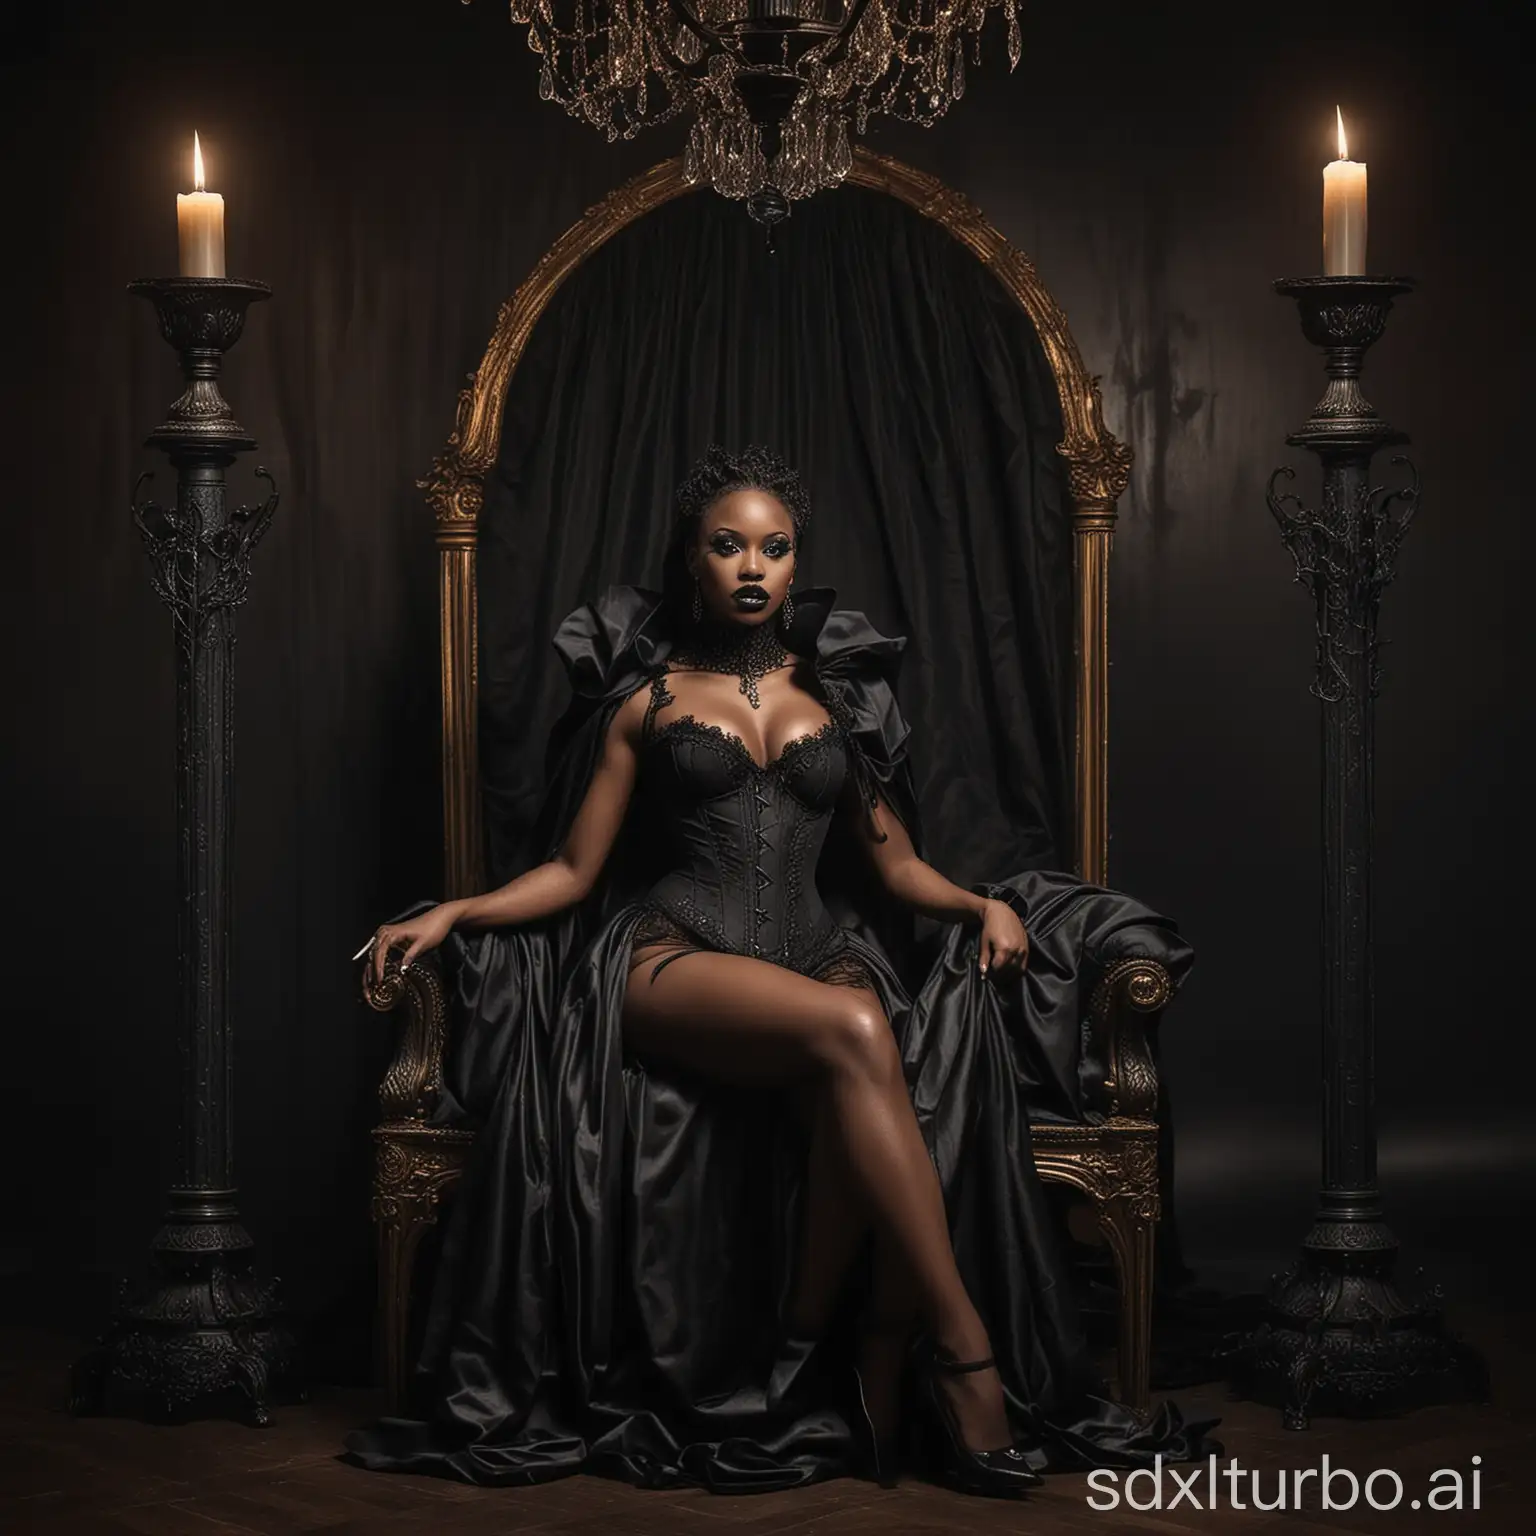 A captivating and dynamic photo of a powerful and majestic black woman, radiating an aura of authority and grace. She is dressed in corset and panties, with a cape adorned high collar that accentuates her strong presence. Her black makeup and high heels highlight her imposing demeanor, siting  in a black trone while on each side a sinister chandelier each with a lit black candle,